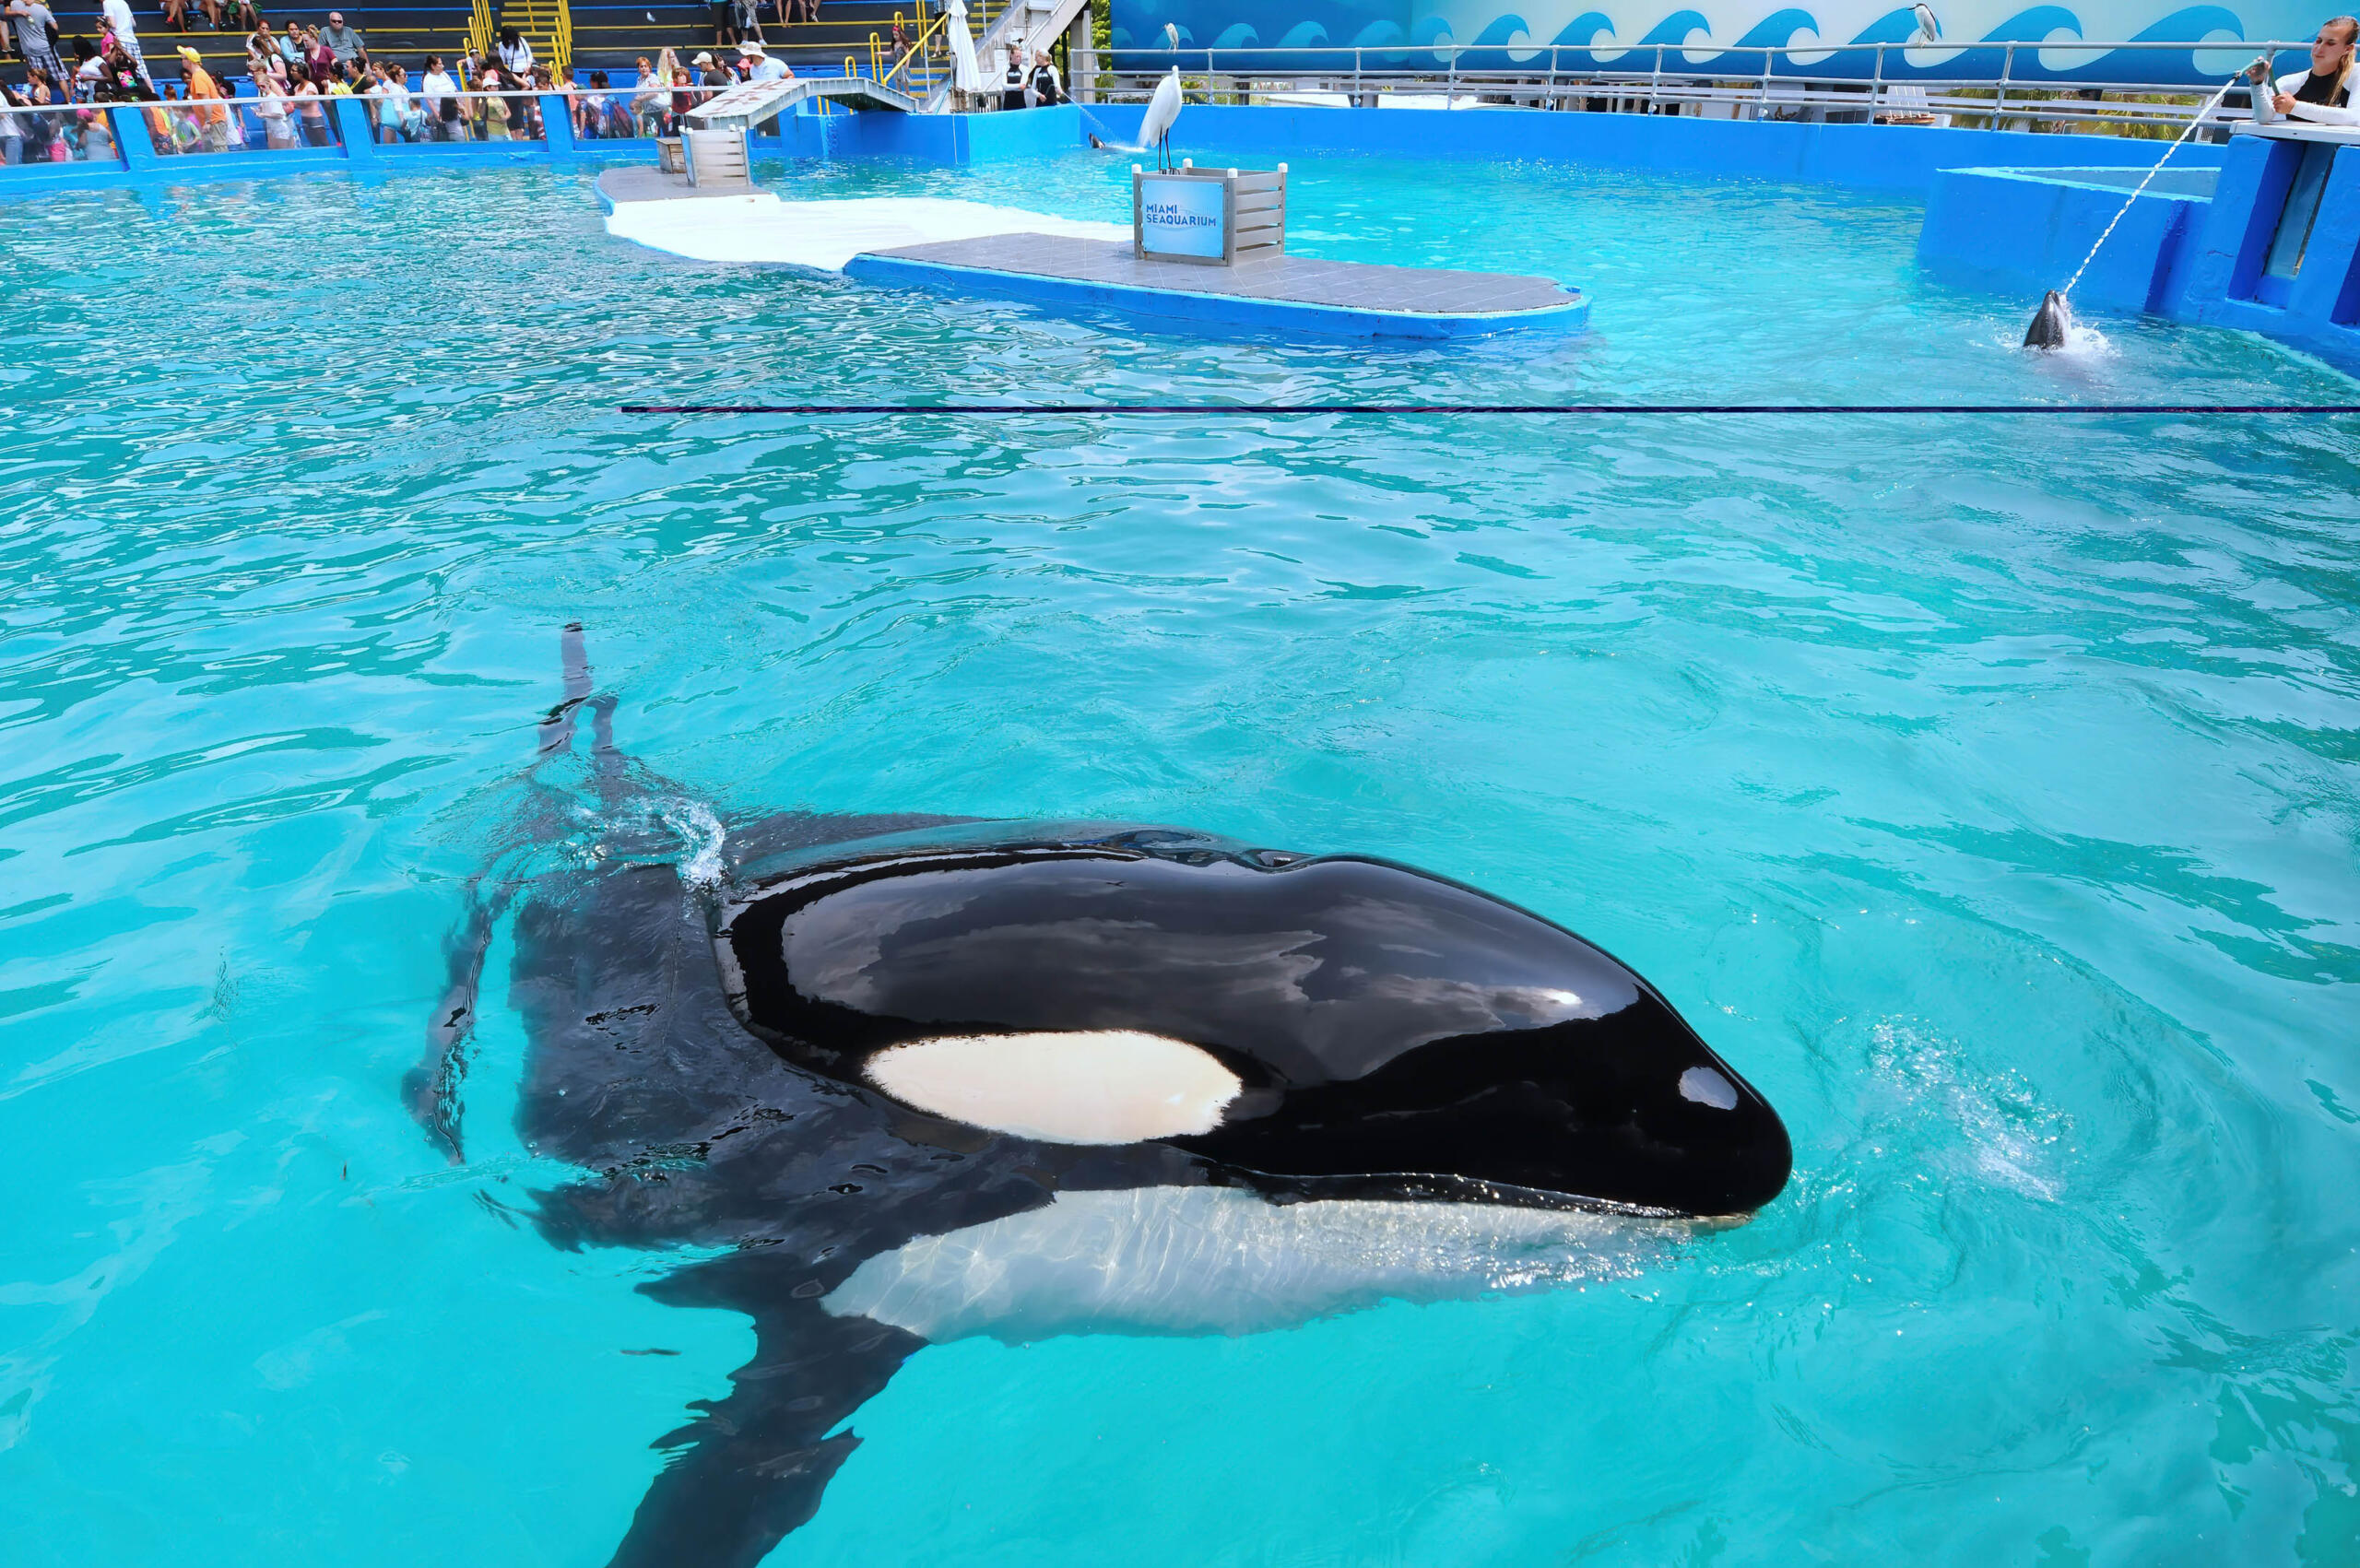 In this photo from March 26, 2015, killer whale Lolita performs at Miami Seaquarium in Key Biscayne. The orca, who has been in captivity since 1970, and was the oldest killer whale in captivity, died on August 18, 2023 as officials were preparing to send her back to her home waters in the Pacific Northwest.